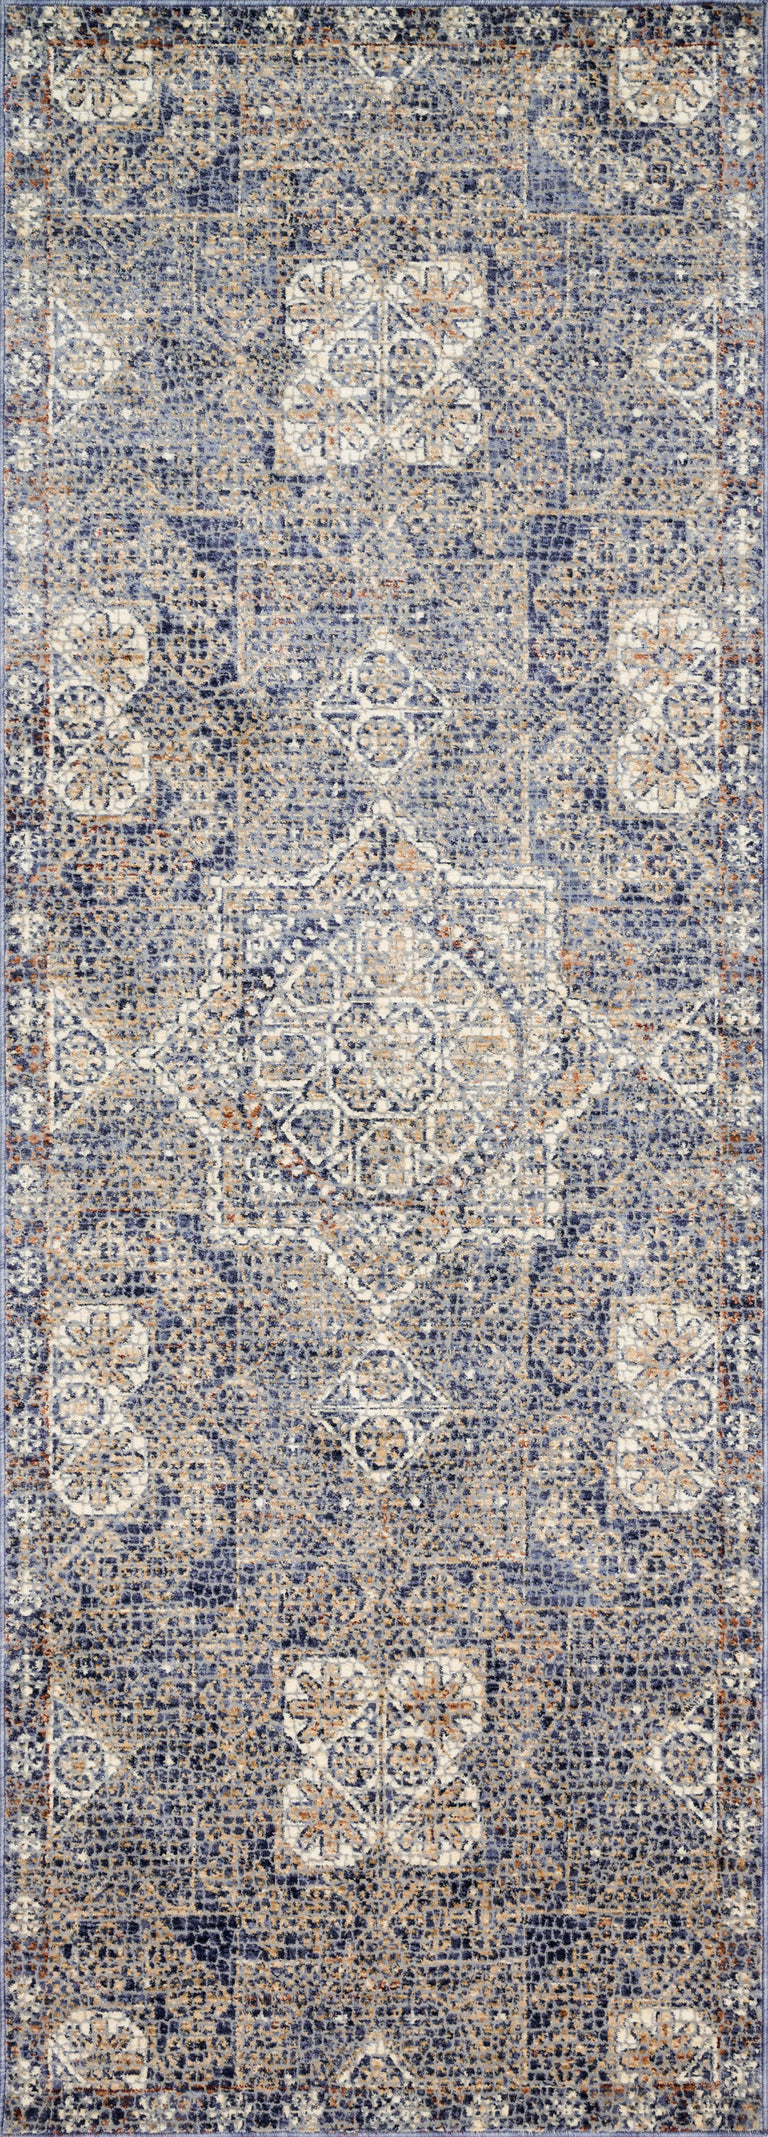 Loloi Rugs Porcia Collection Rug in Blue, Blue - 7'10" x 10', PORCPB-02BBBB7AA0